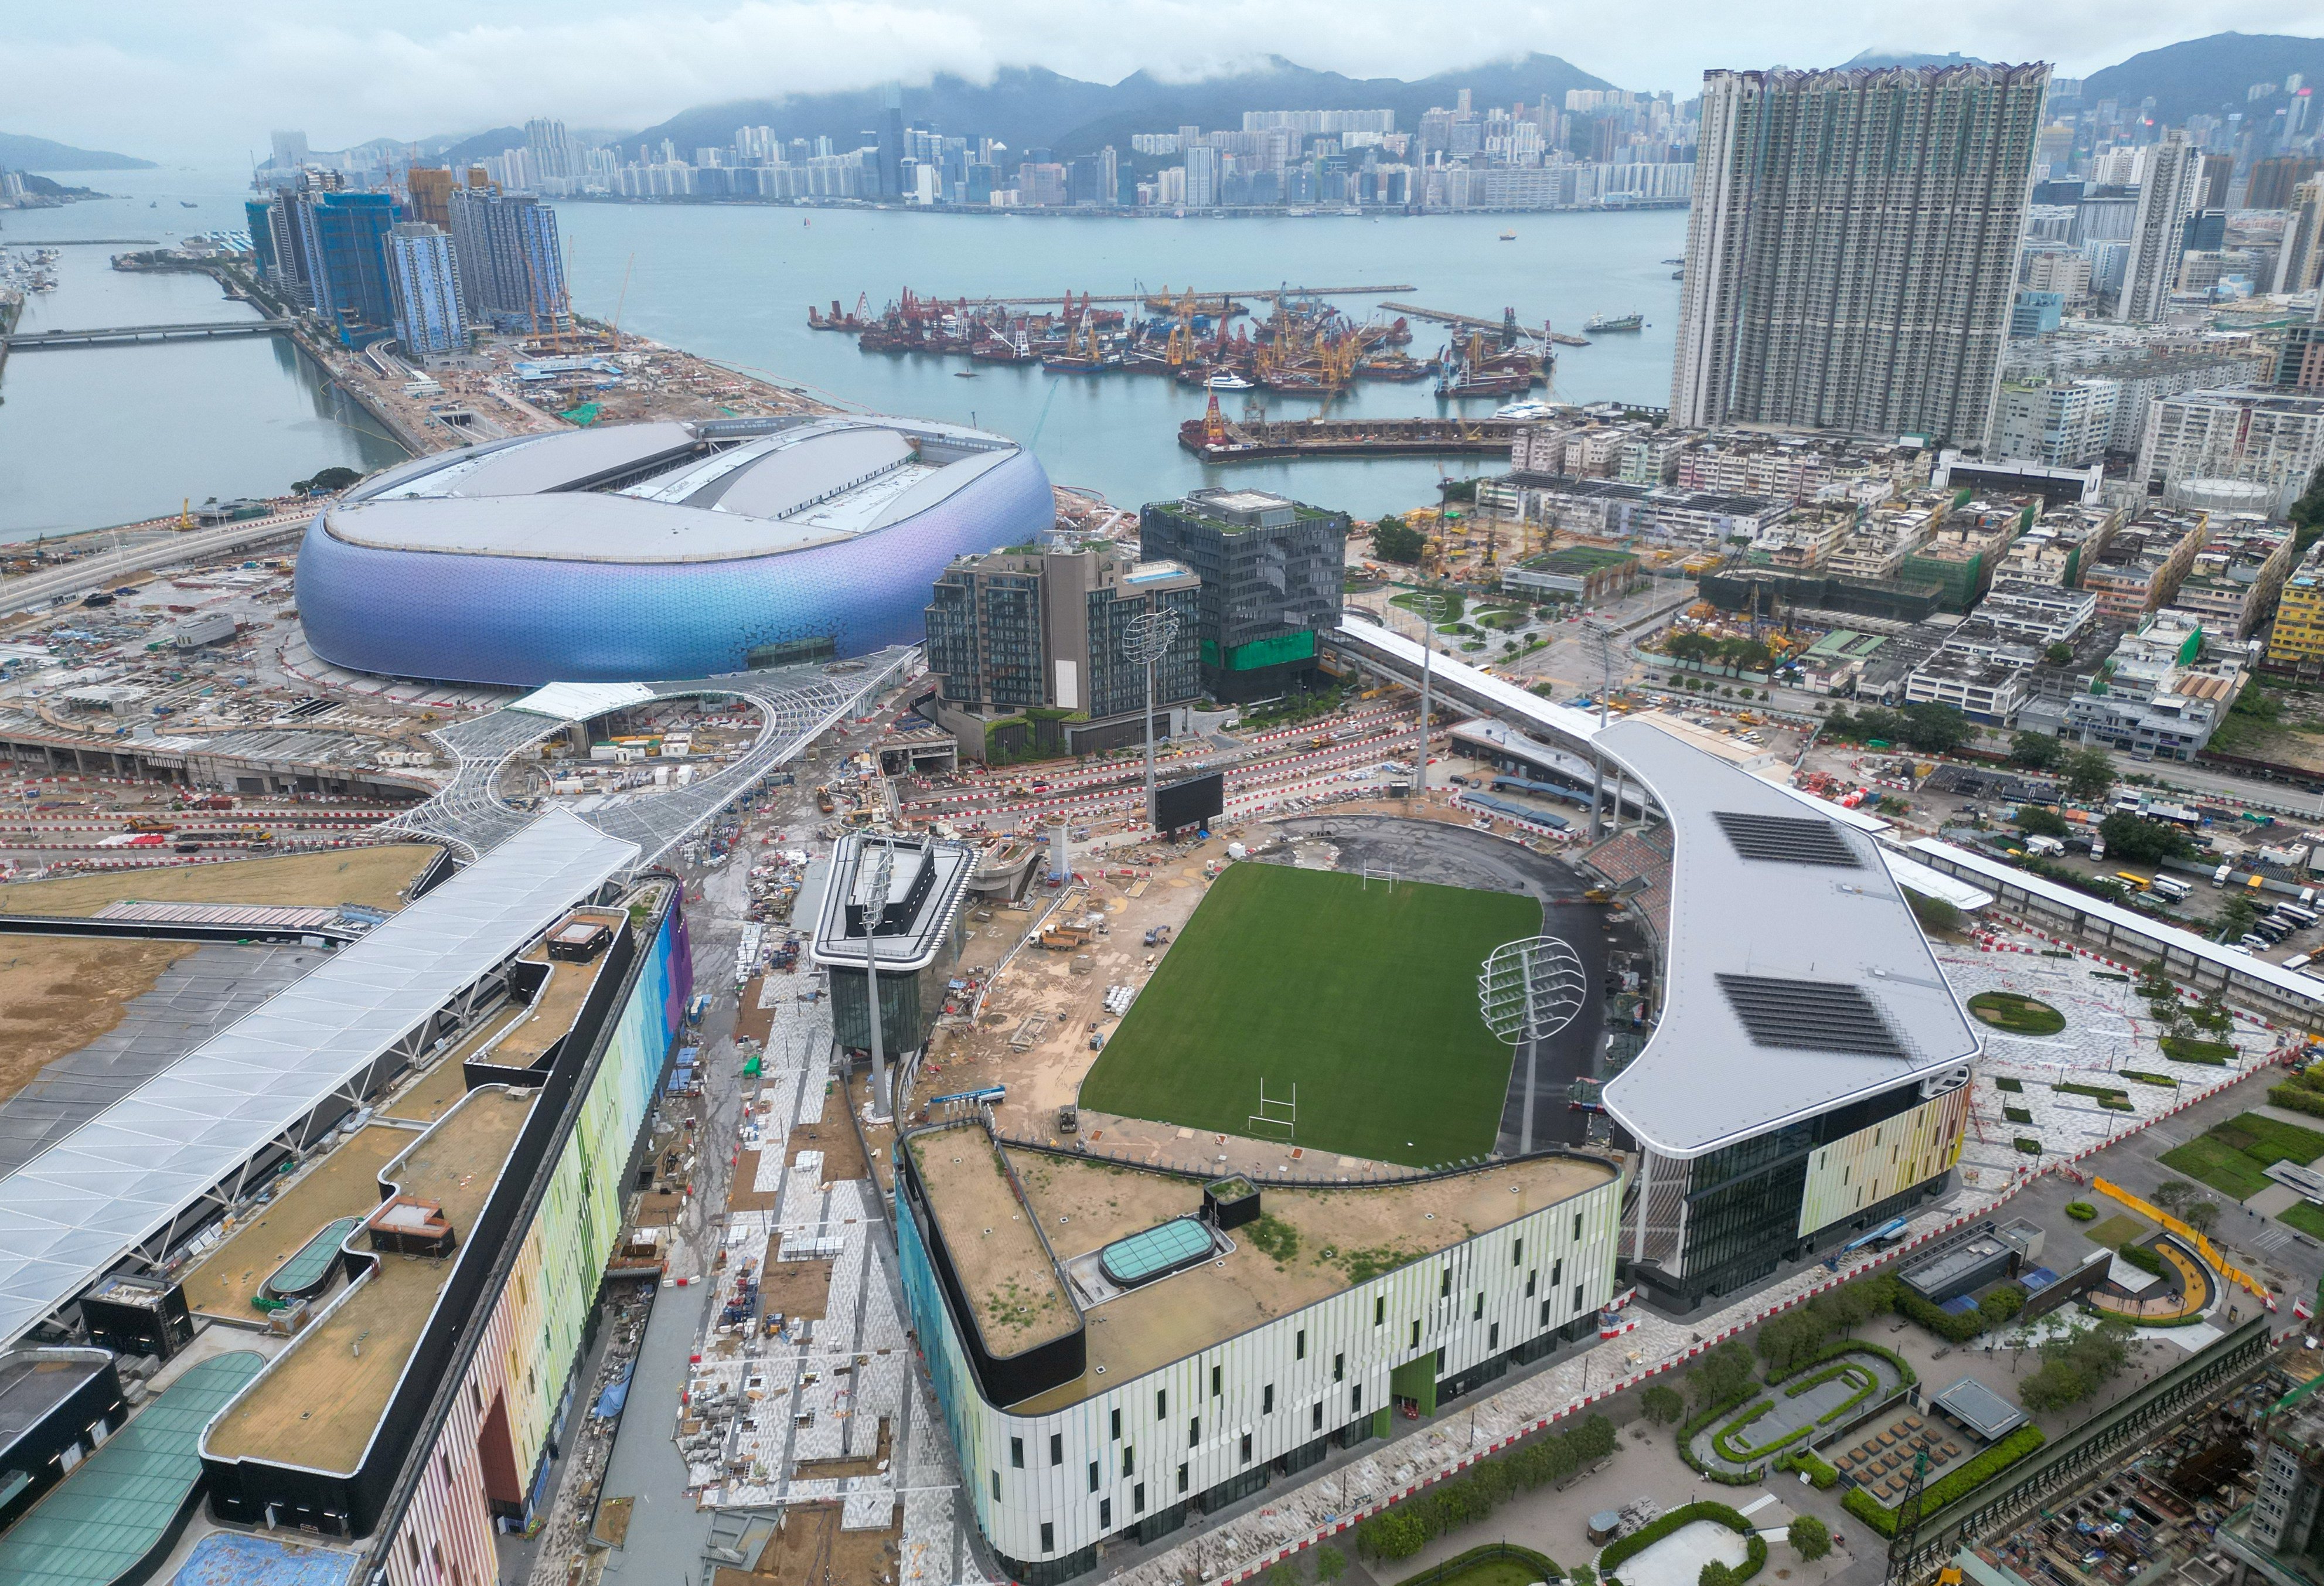 Covering 28 hectares, the park is the largest sports infrastructure project in Hong Kong’s history. Photo: Eugene Lee